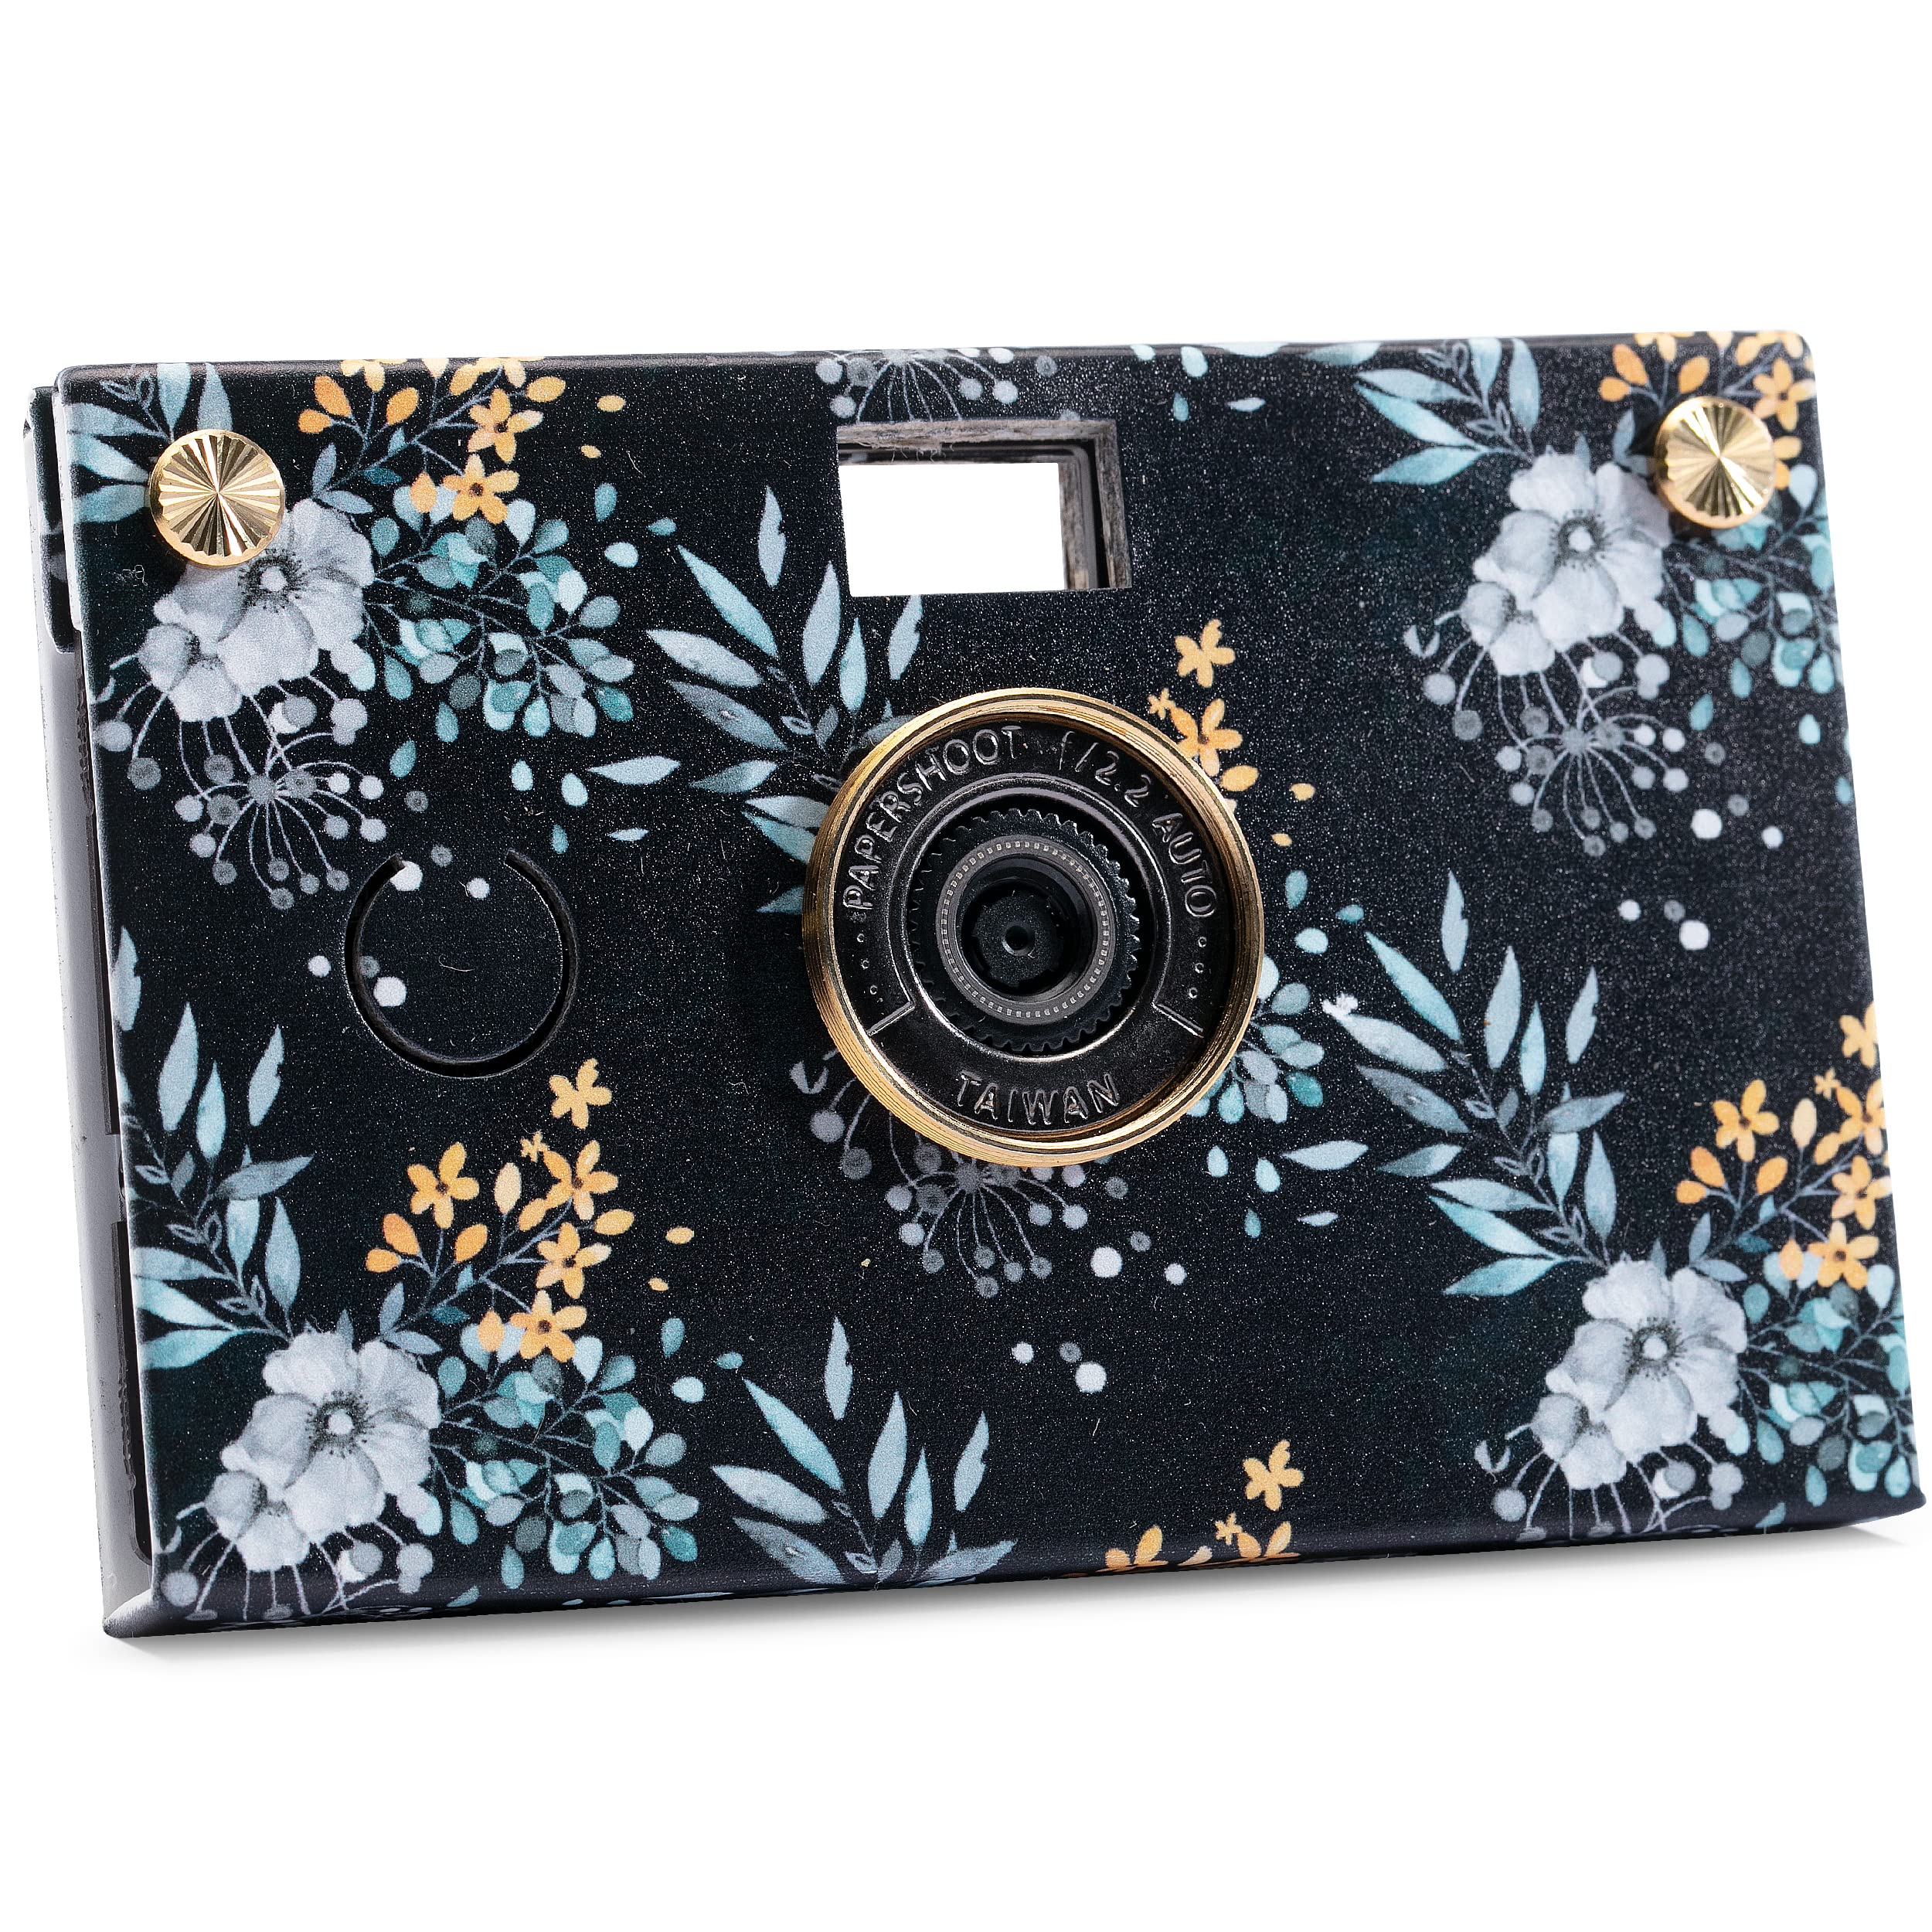 Paper Shoot Camera - Digital Papershoot Camera with Four Filters & Timelapse - Papershoot Cameras Include a Beautiful Case & Accessories (Summer Bloom Quiet)